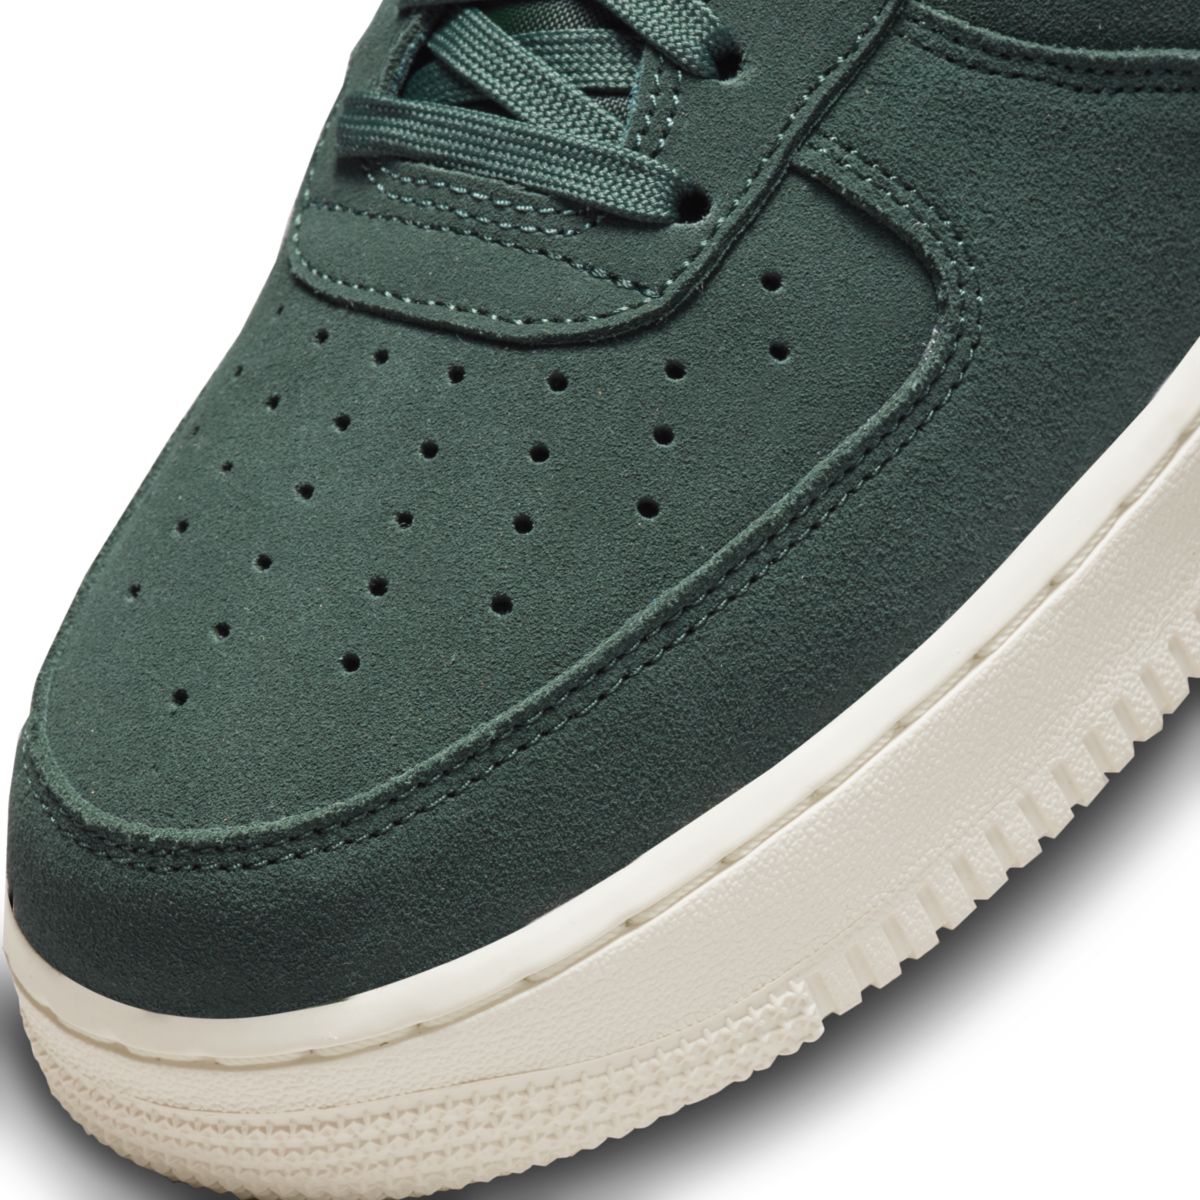 Nike Air Force 1 Low Athletic Club Pro Green DH7435-300 7